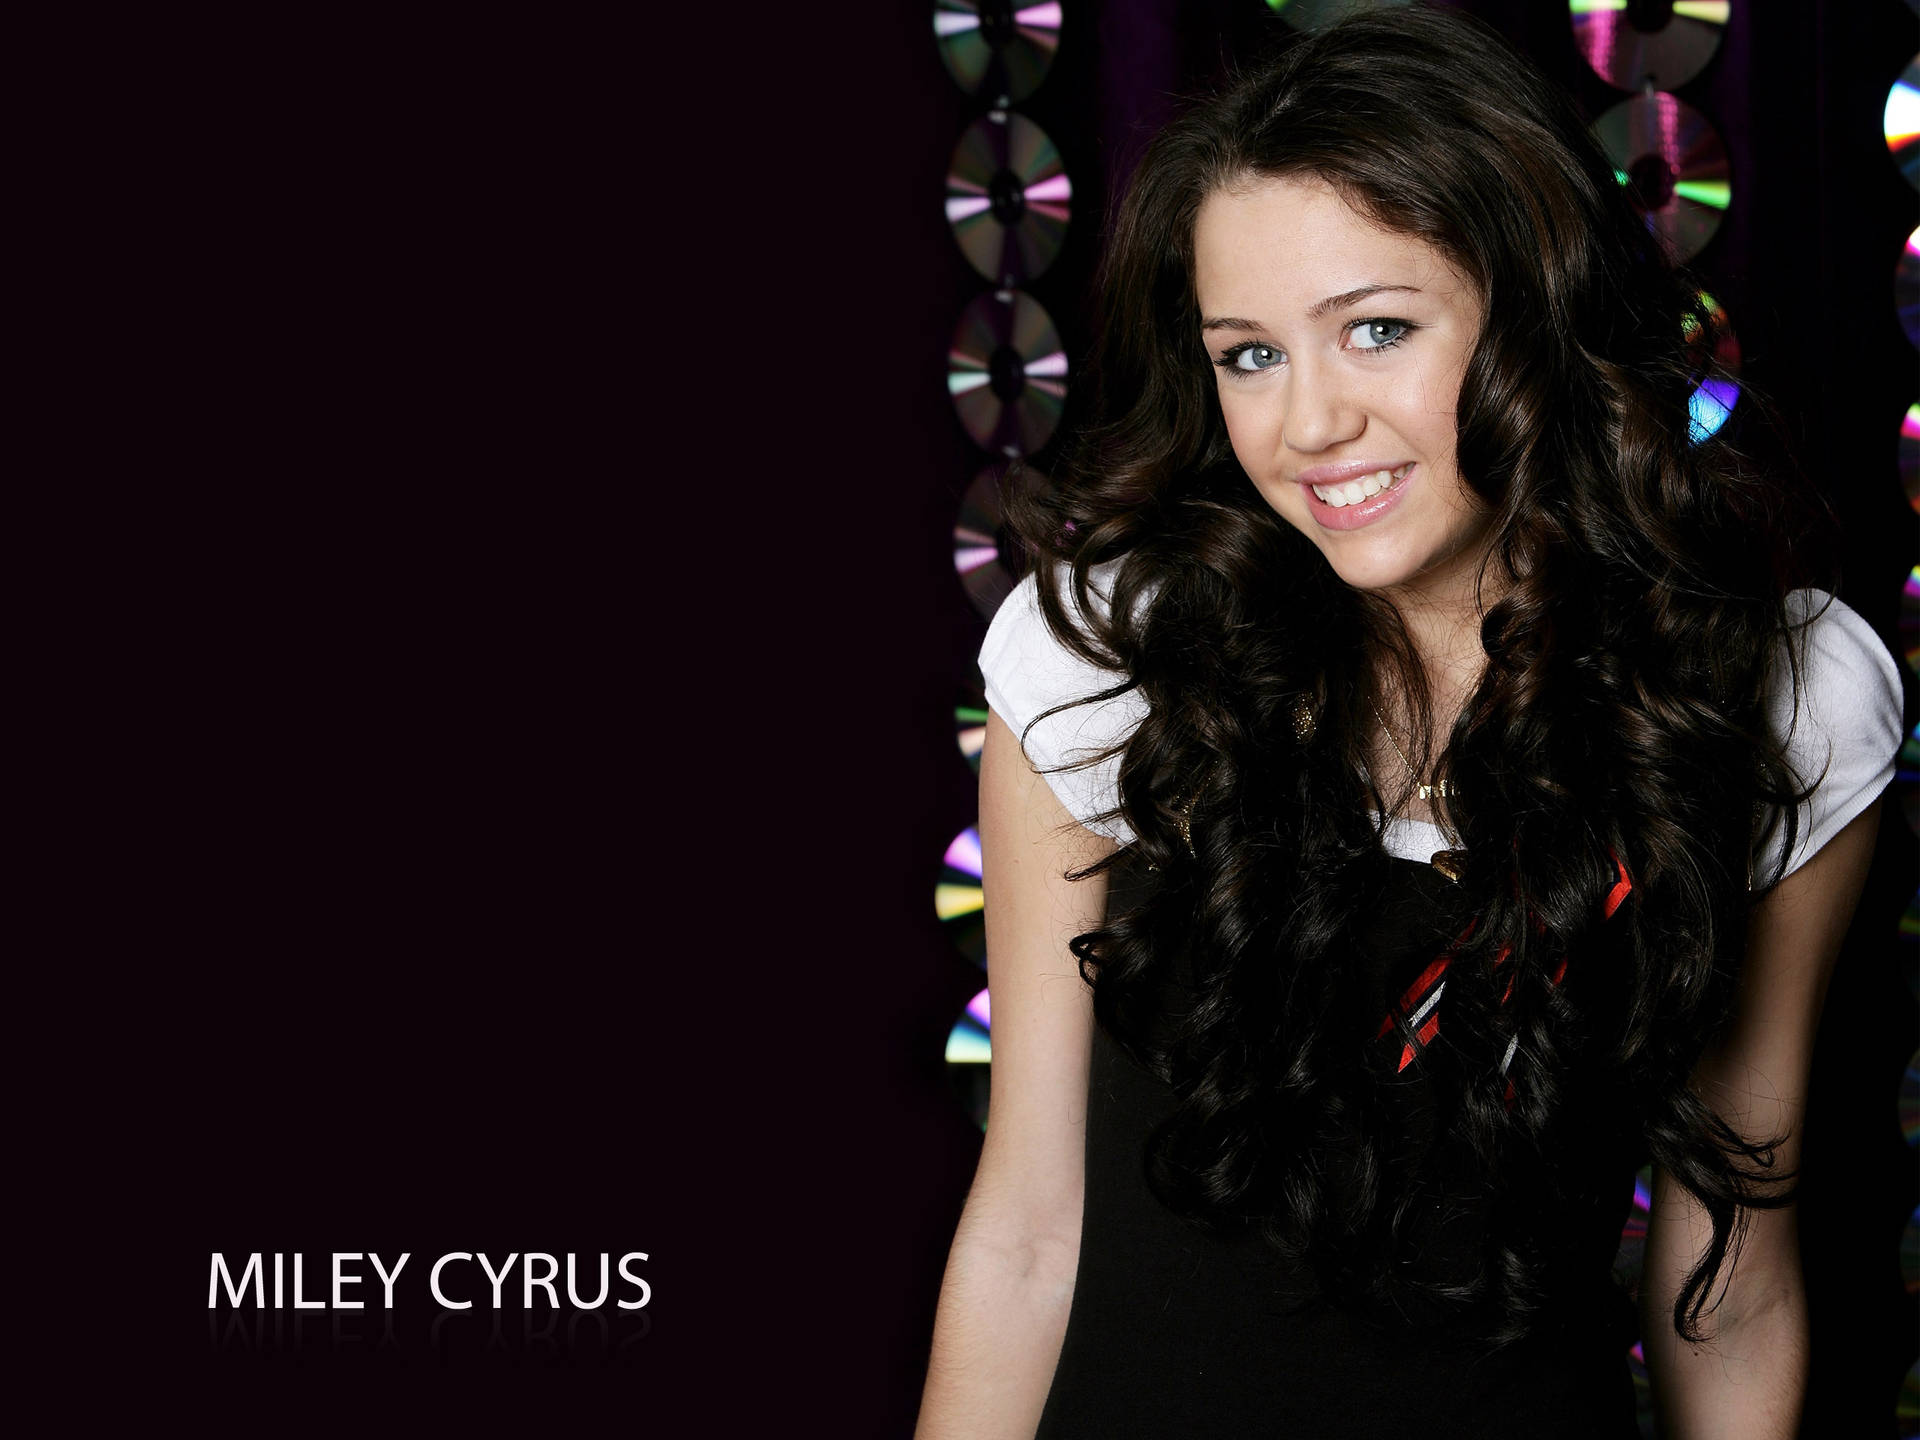 Young Singer Miley Cyrus Background